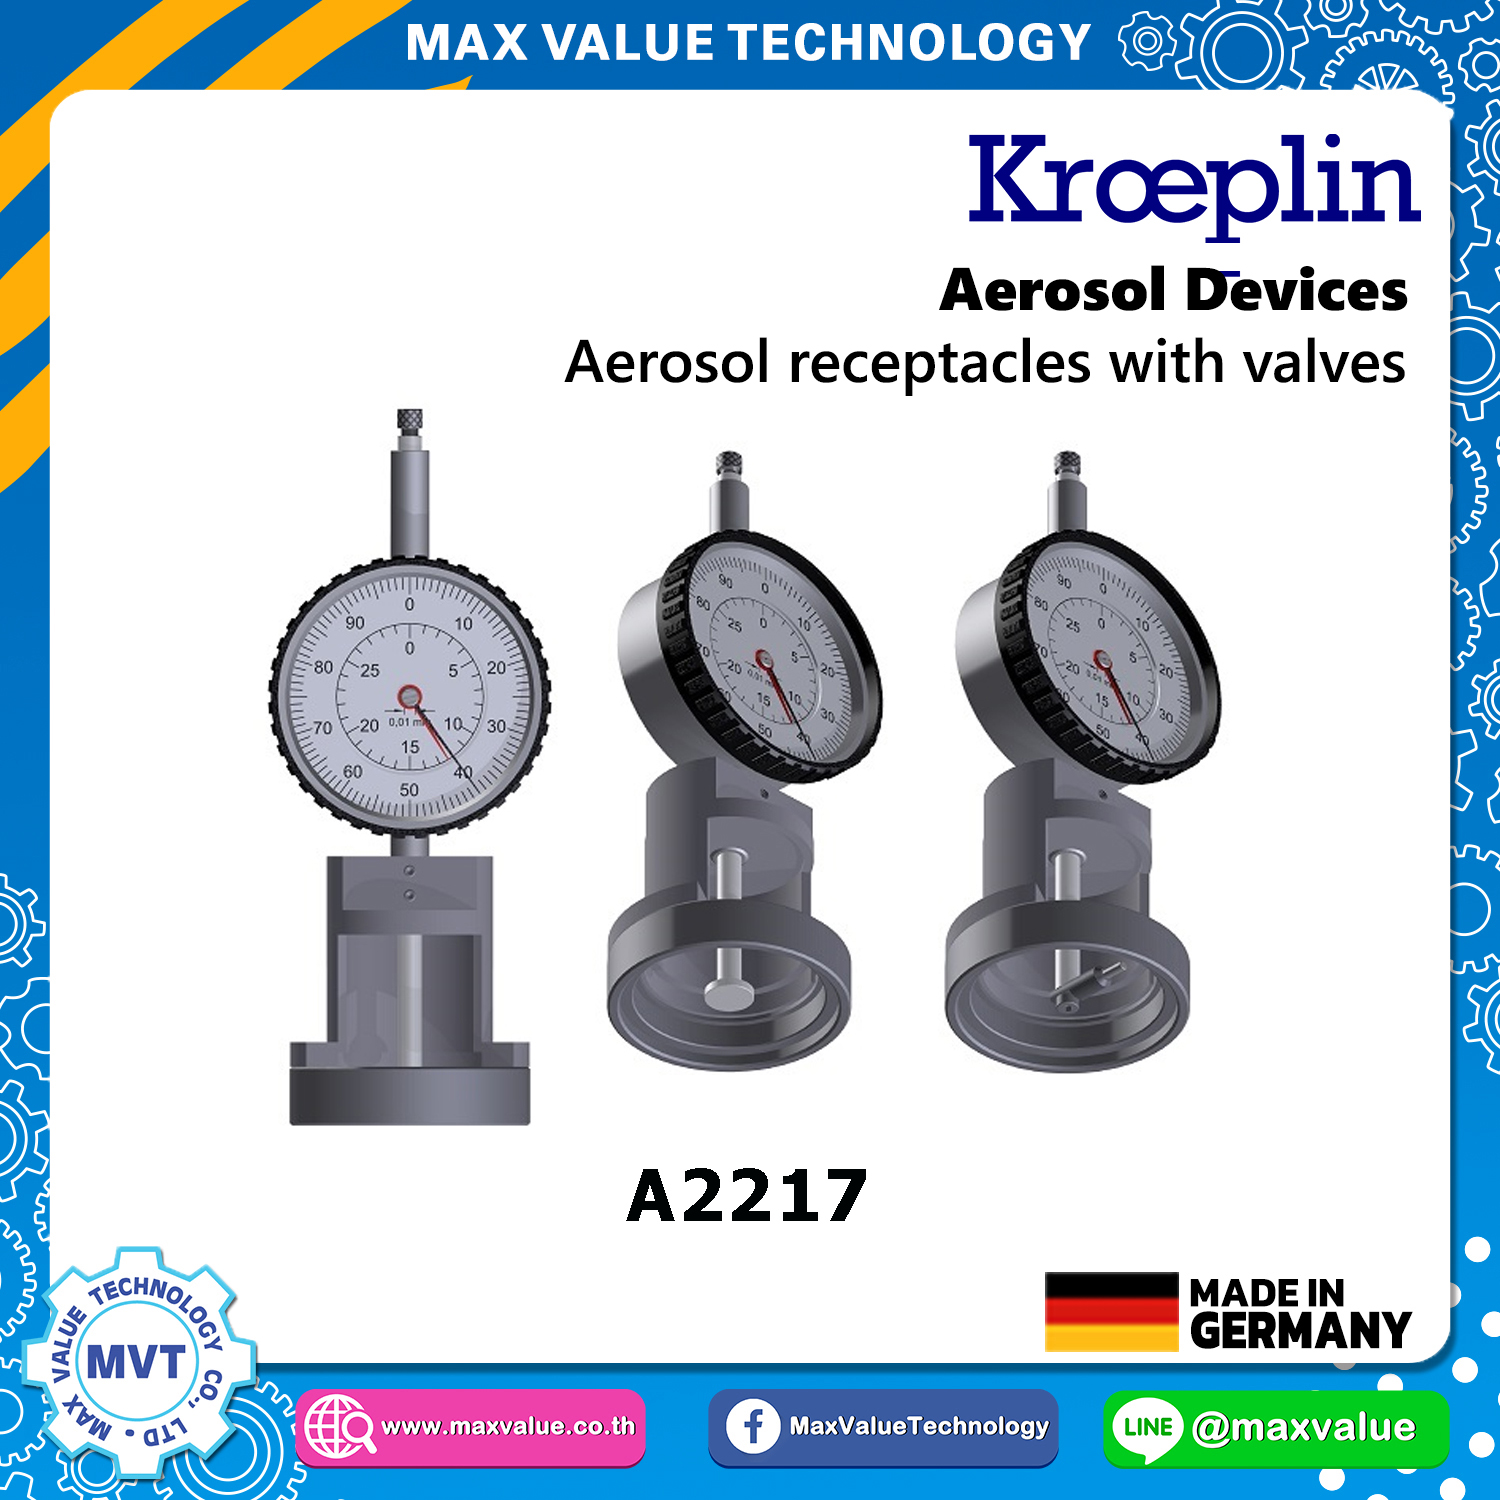 A2217/AE2217 - Aerosol devices - Aerosol receptacles with valves